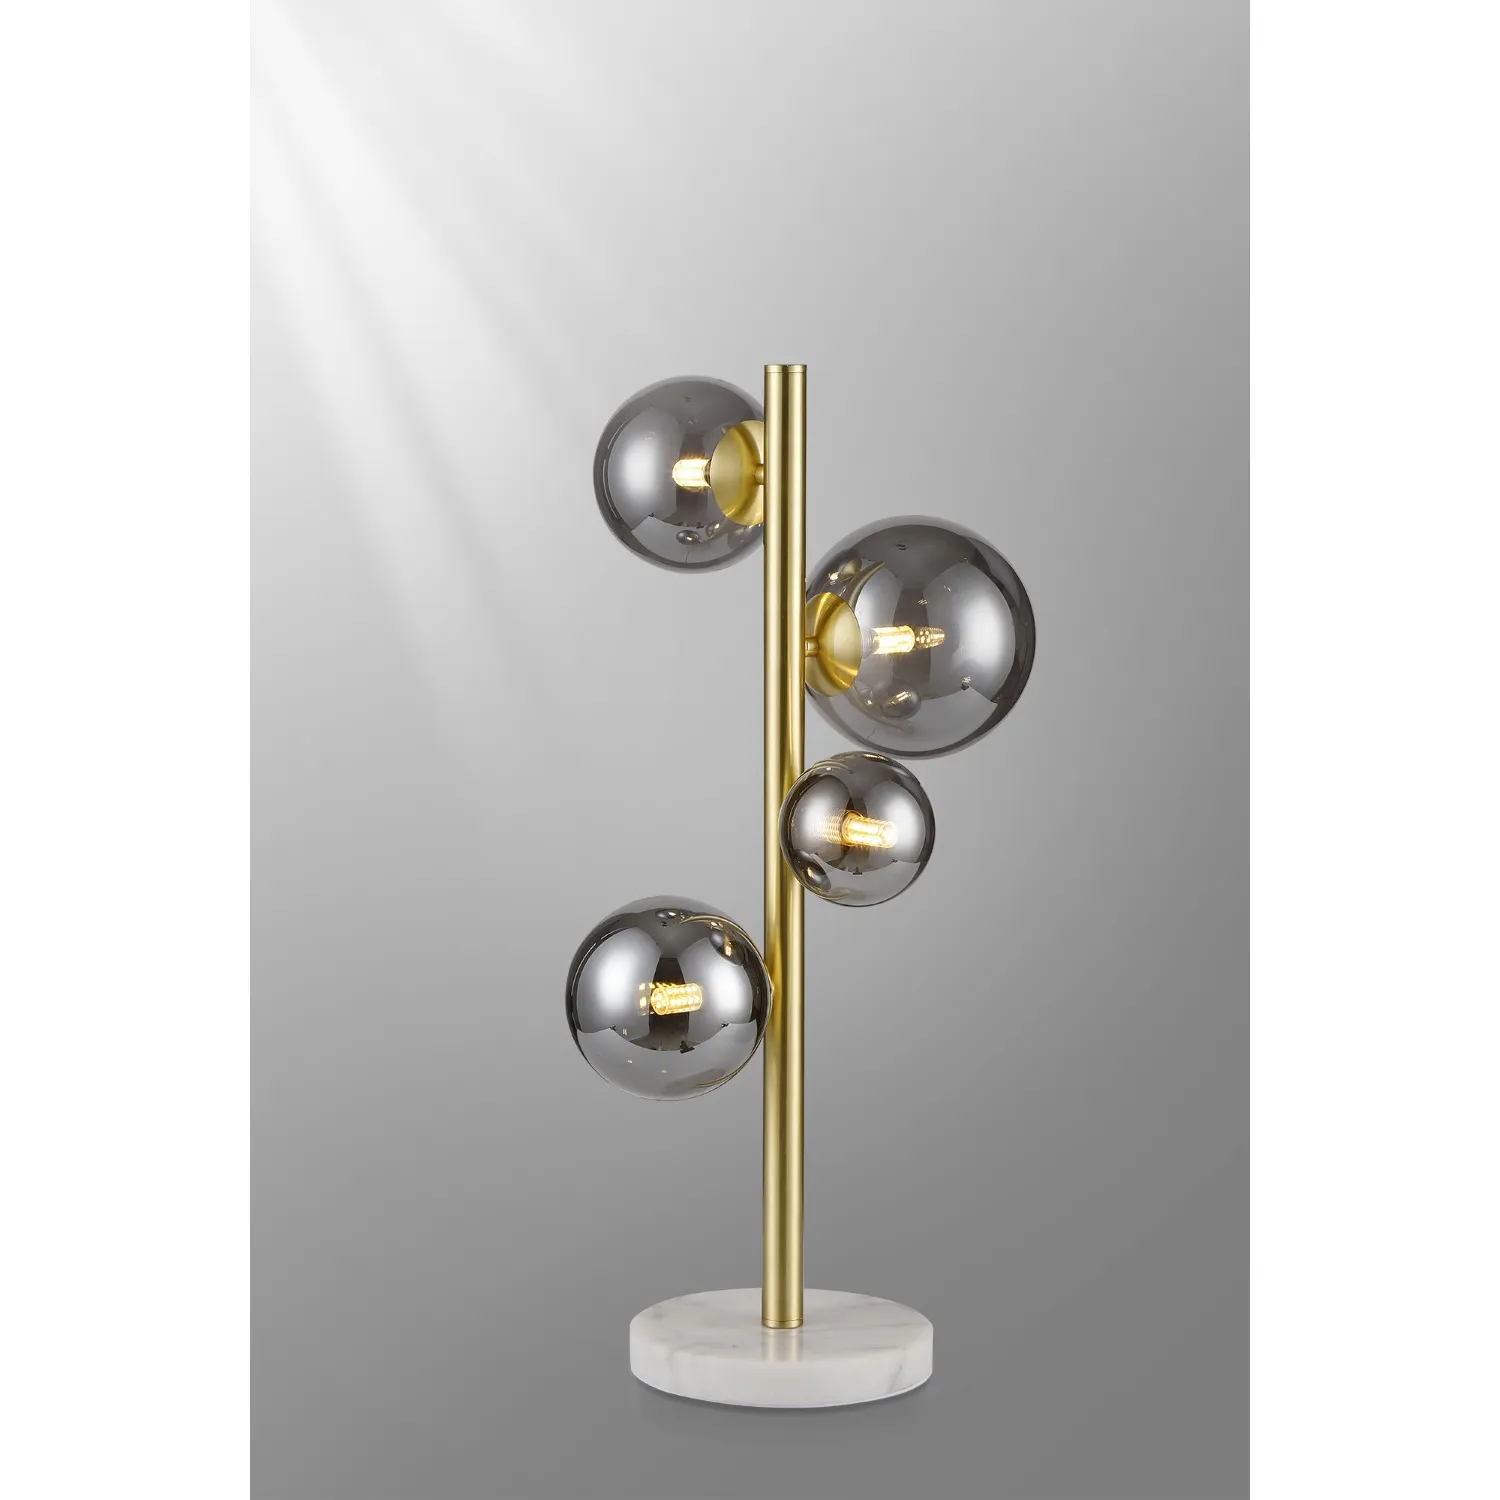 Tenterden Table Lamp, 4 x G9, Satin Gold, Smoke Plated Glass